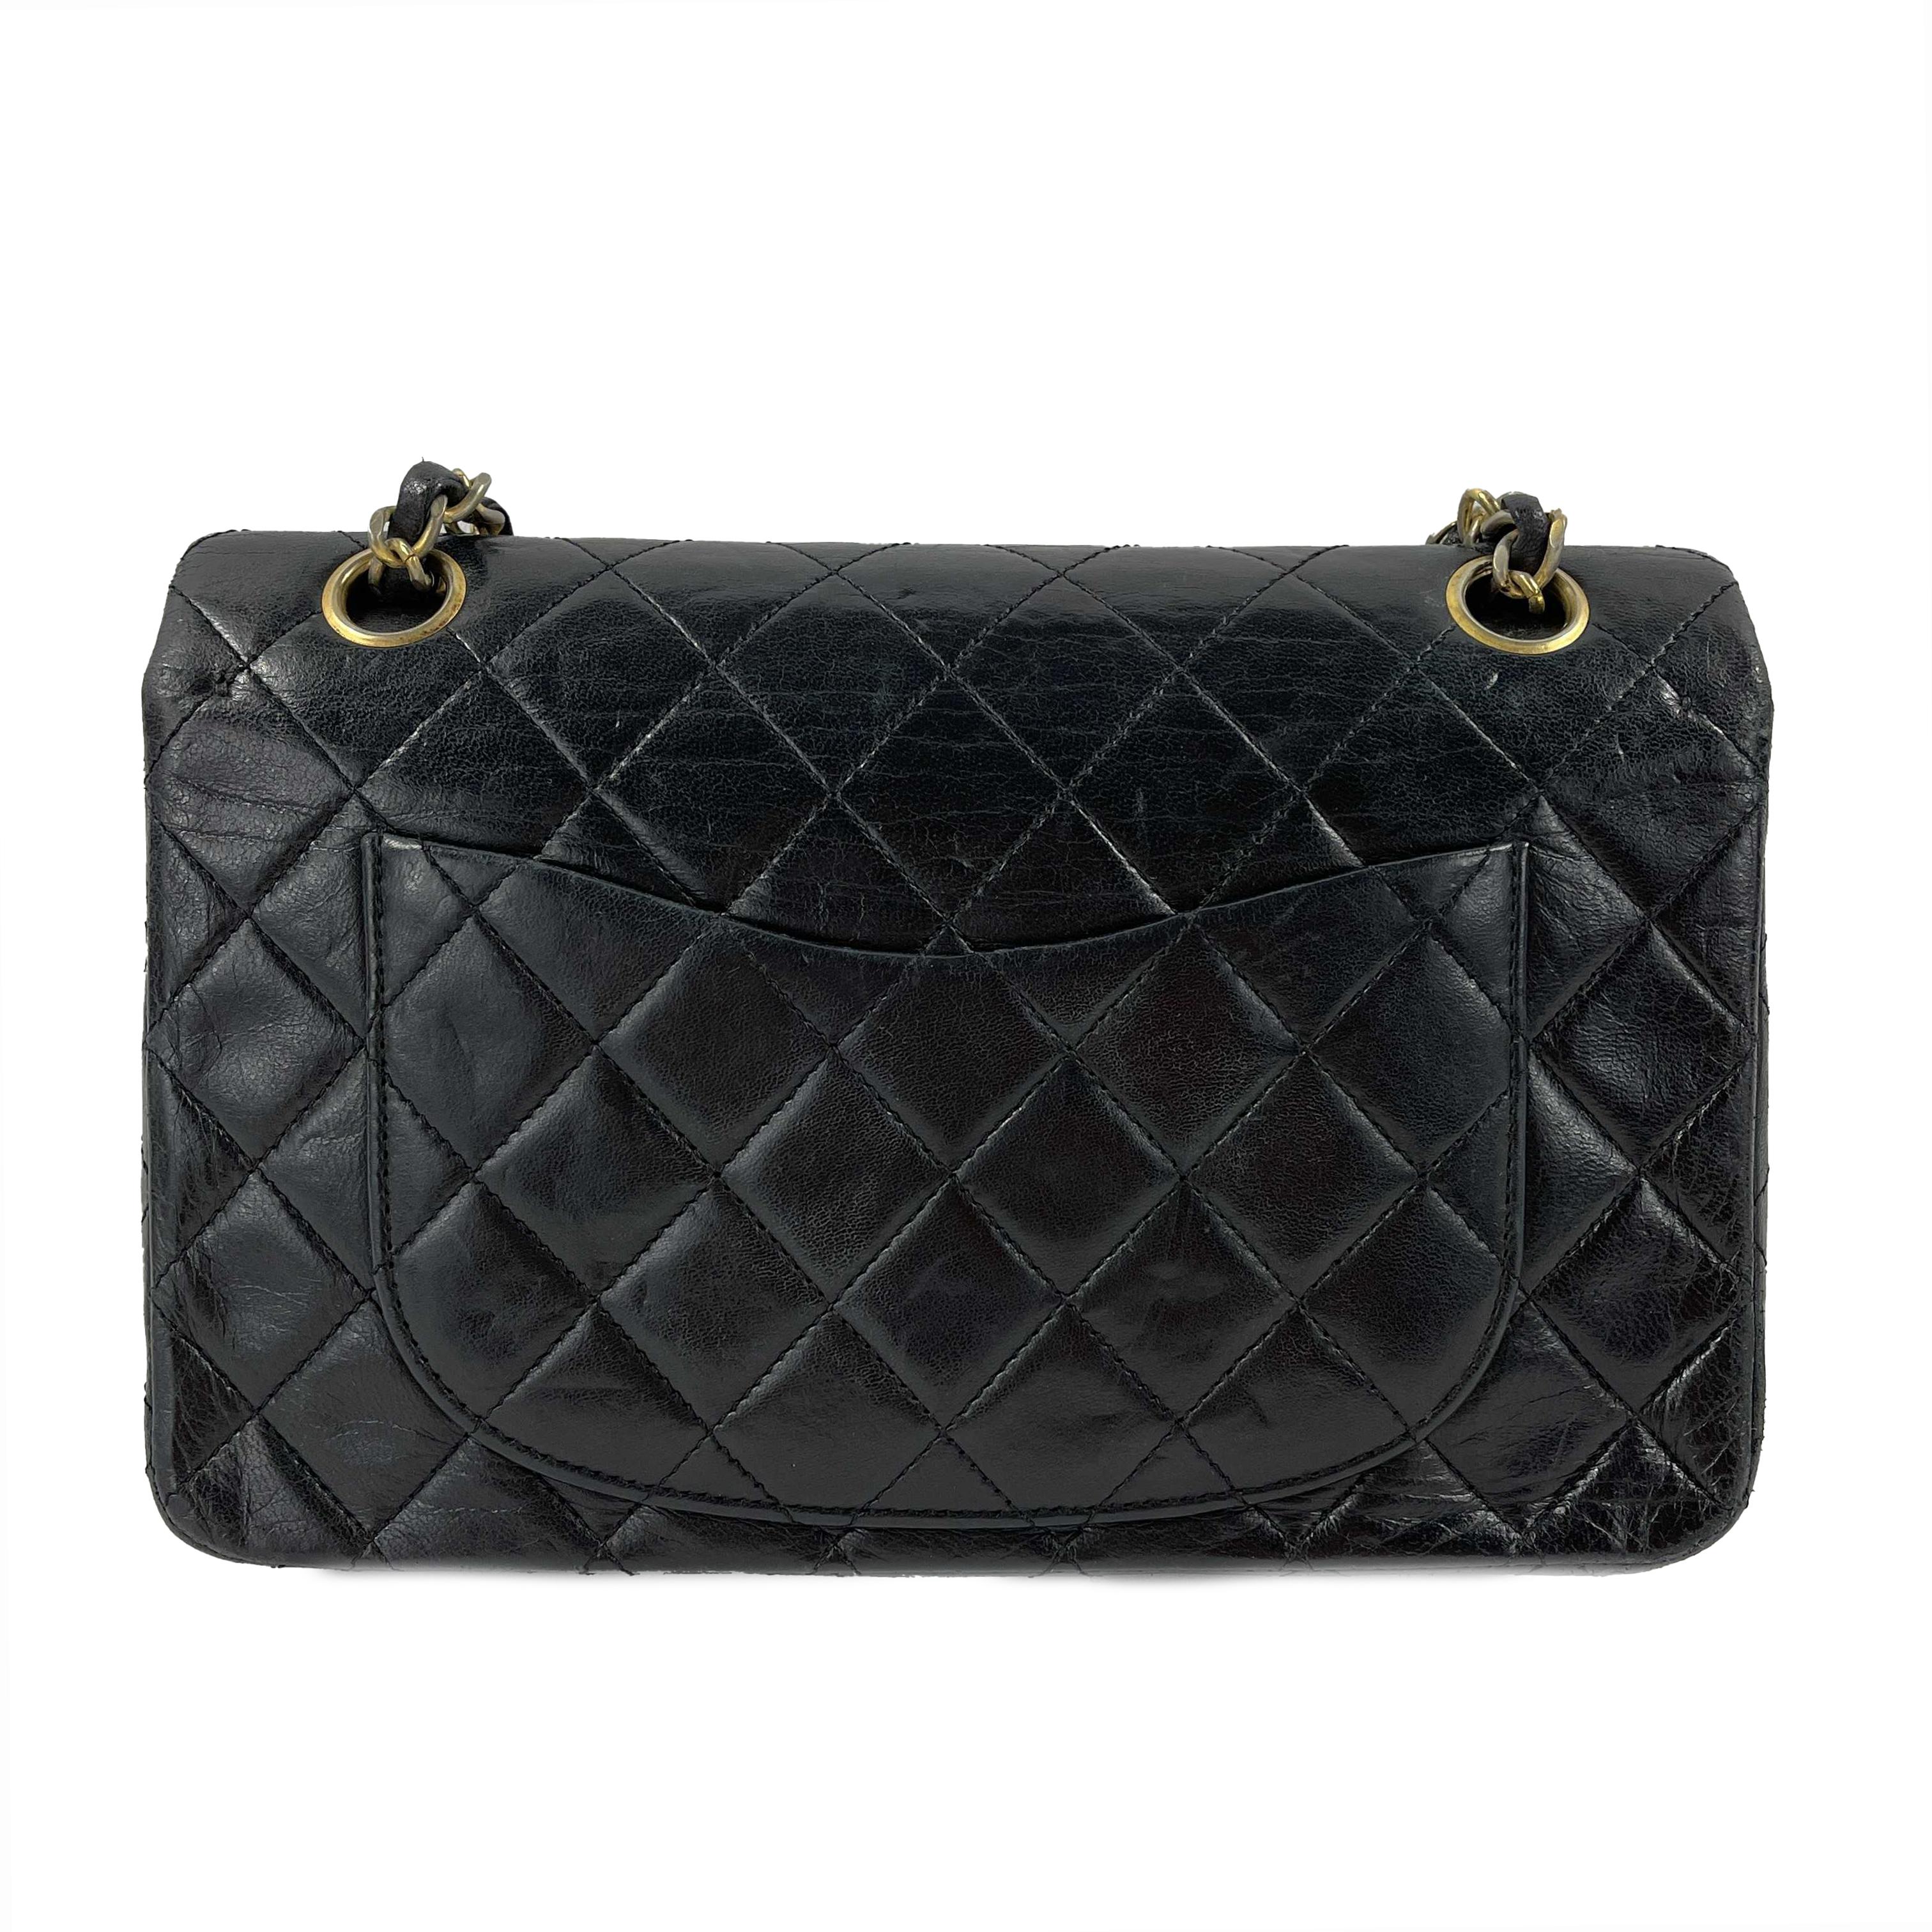 CHANEL - 1980s Small Classic Black Quilted Leather Flap Shoulder Bag / Crossbody

Description

This vintage Chanel flap handbag is from the 1986 to 1988 collection.
It is crafted with black quilted lambskin leather and gold-toned hardware